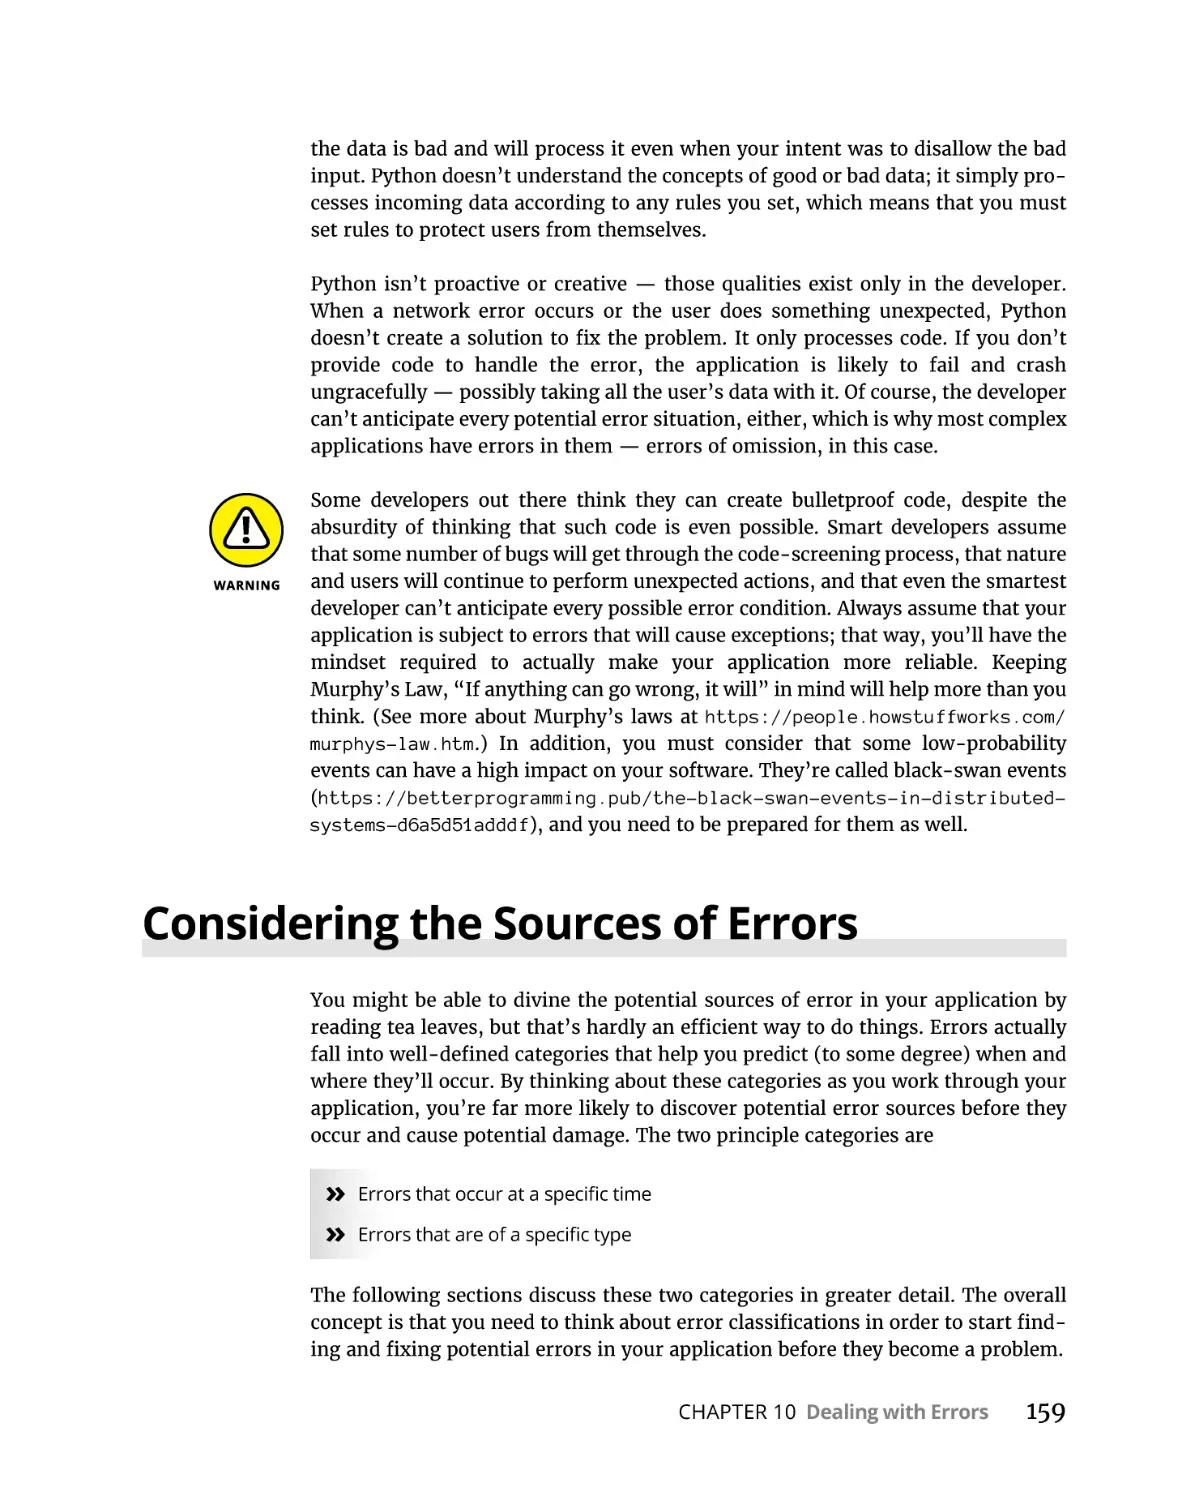 Considering the Sources of Errors